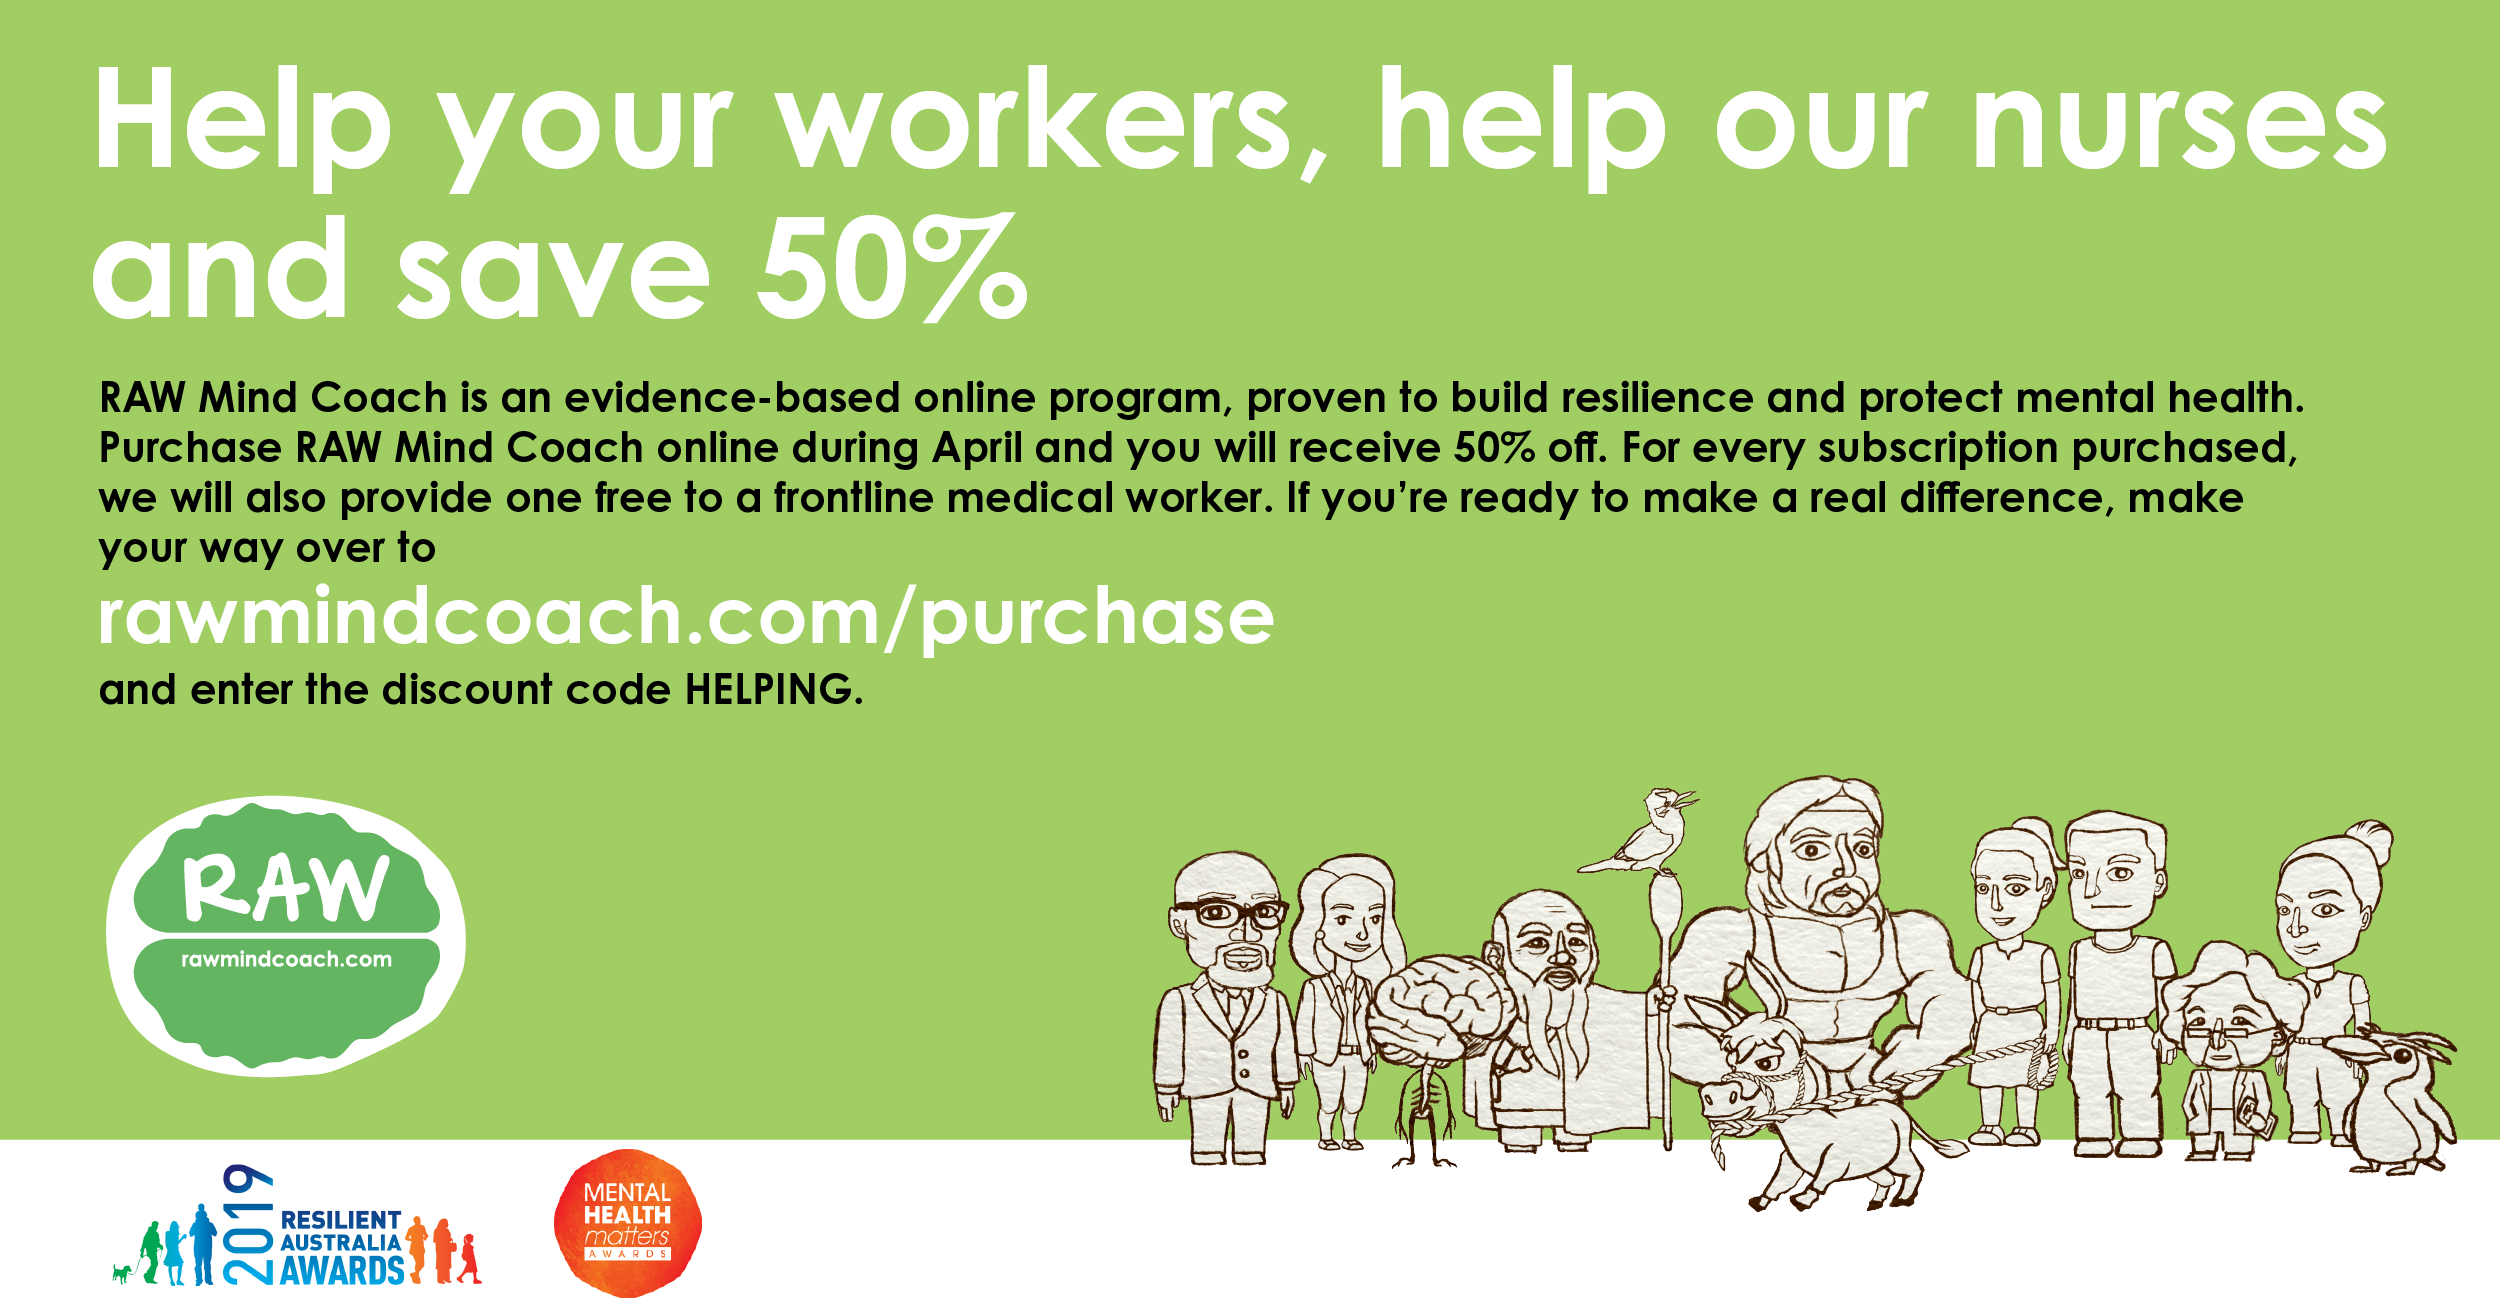 Help your workers, help our nurses and save 50%